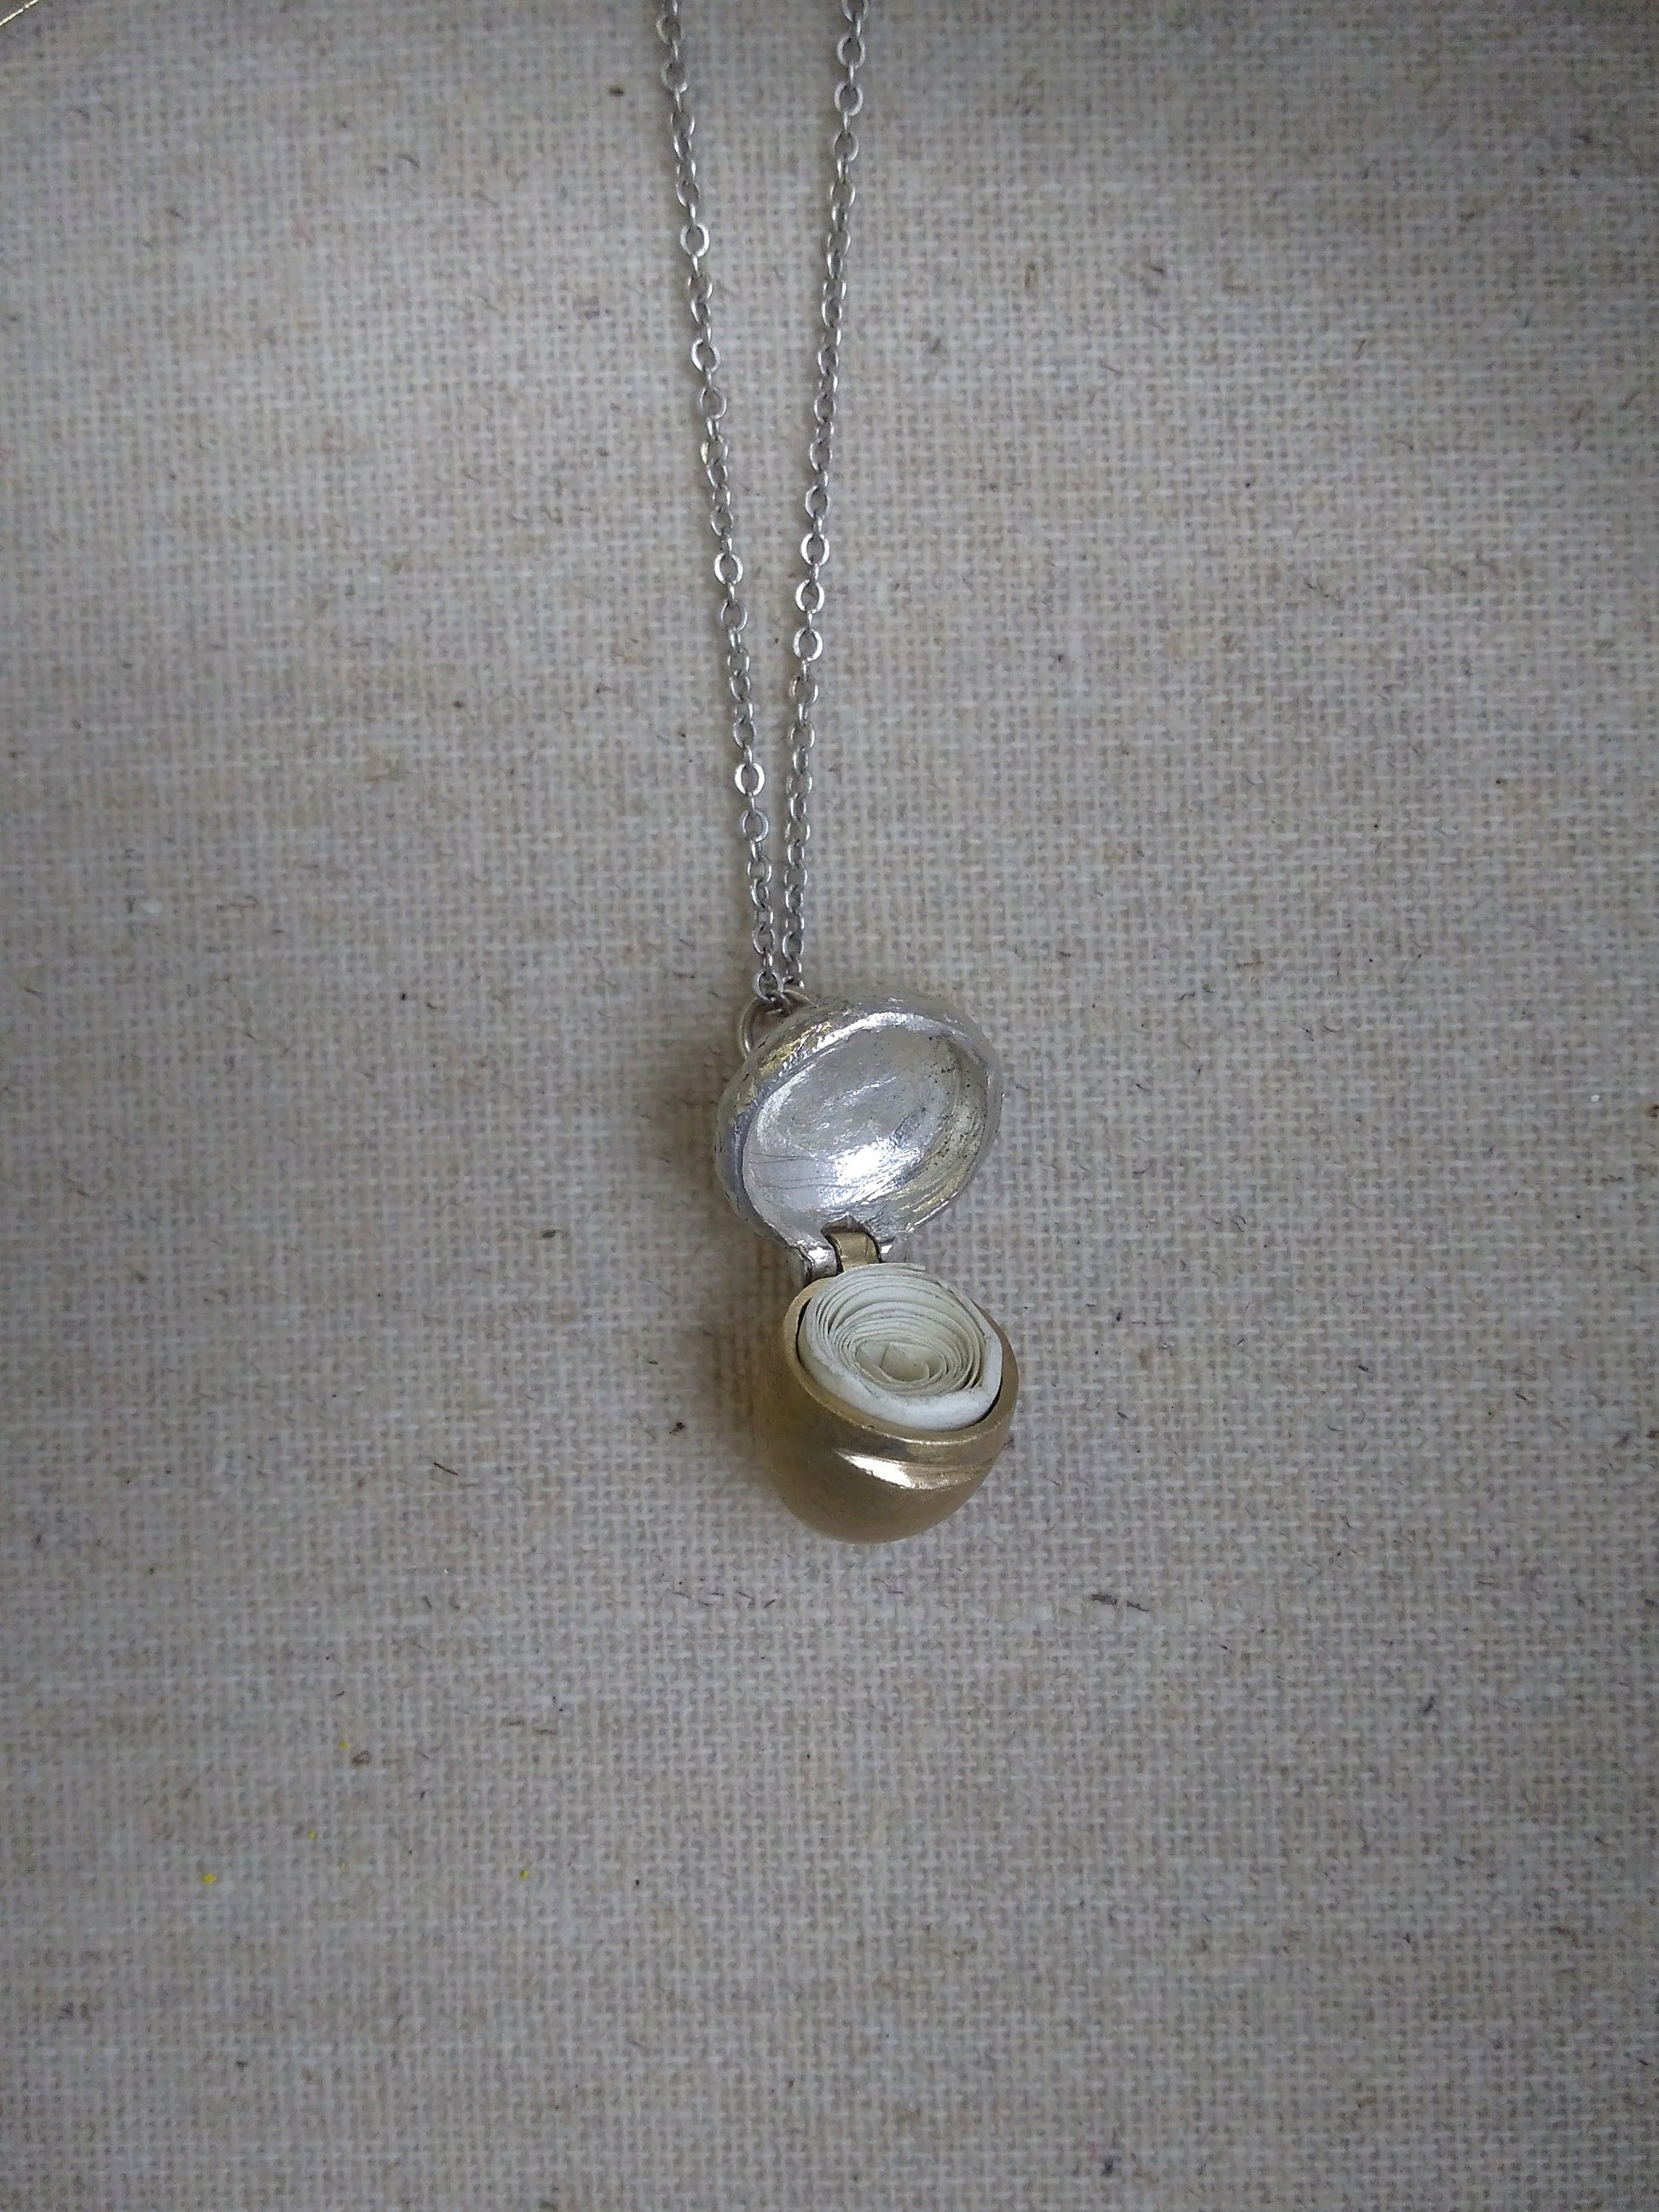 Detail of shiny silver acorn locket with cap hinged open showing the coiled paper note inside